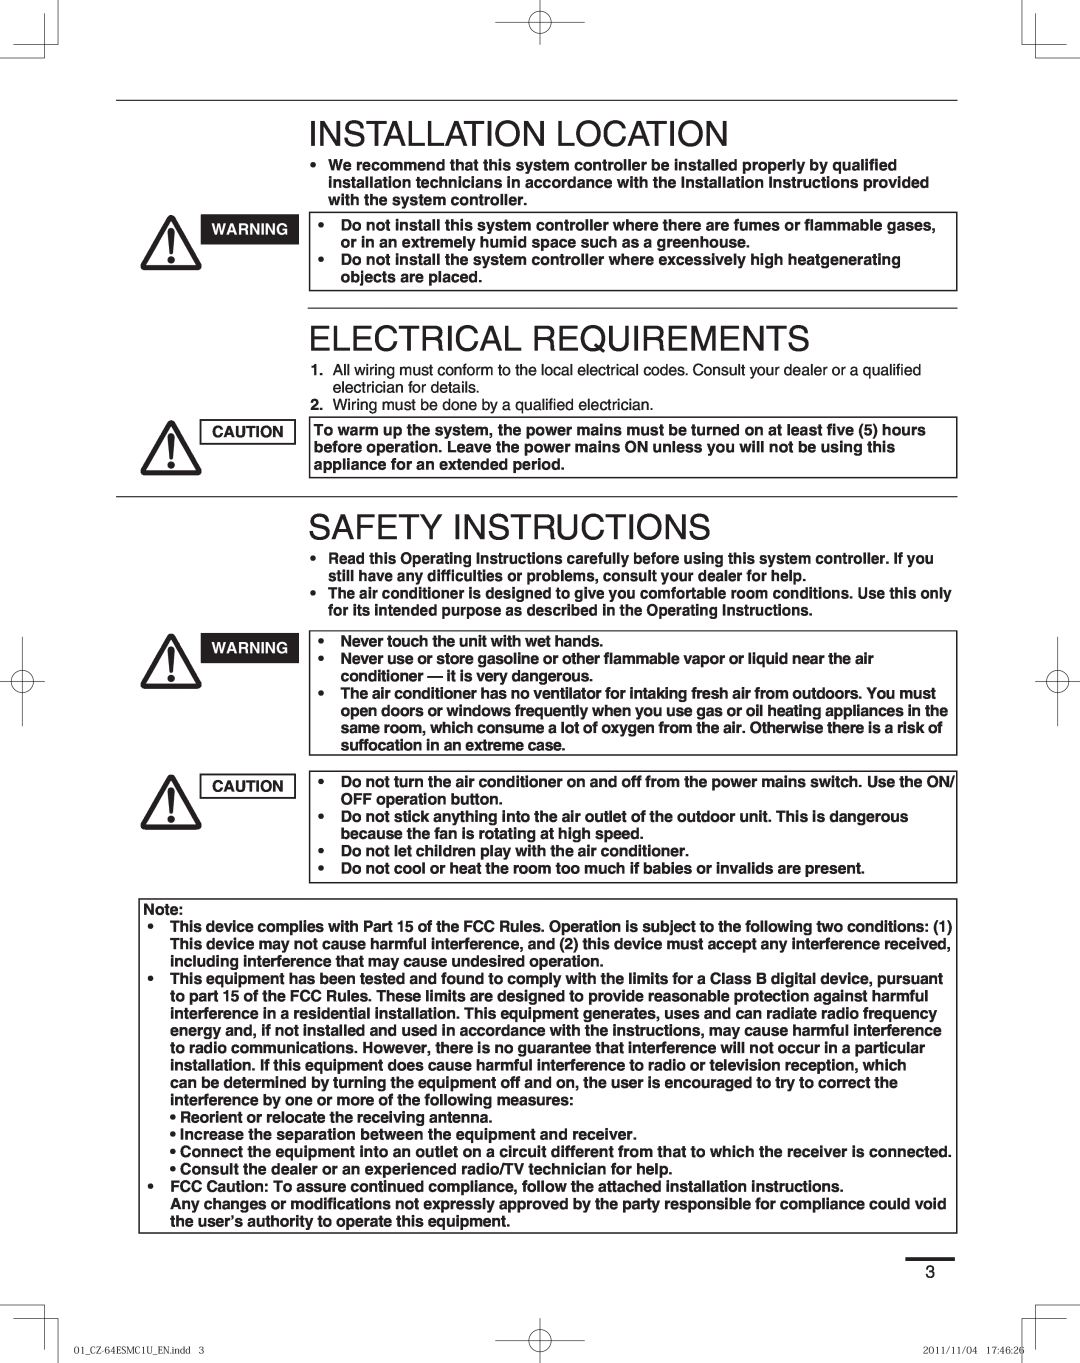 Panasonic CZ-64ESMC1U manual Installation Location, Electrical Requirements, Safety Instructions 